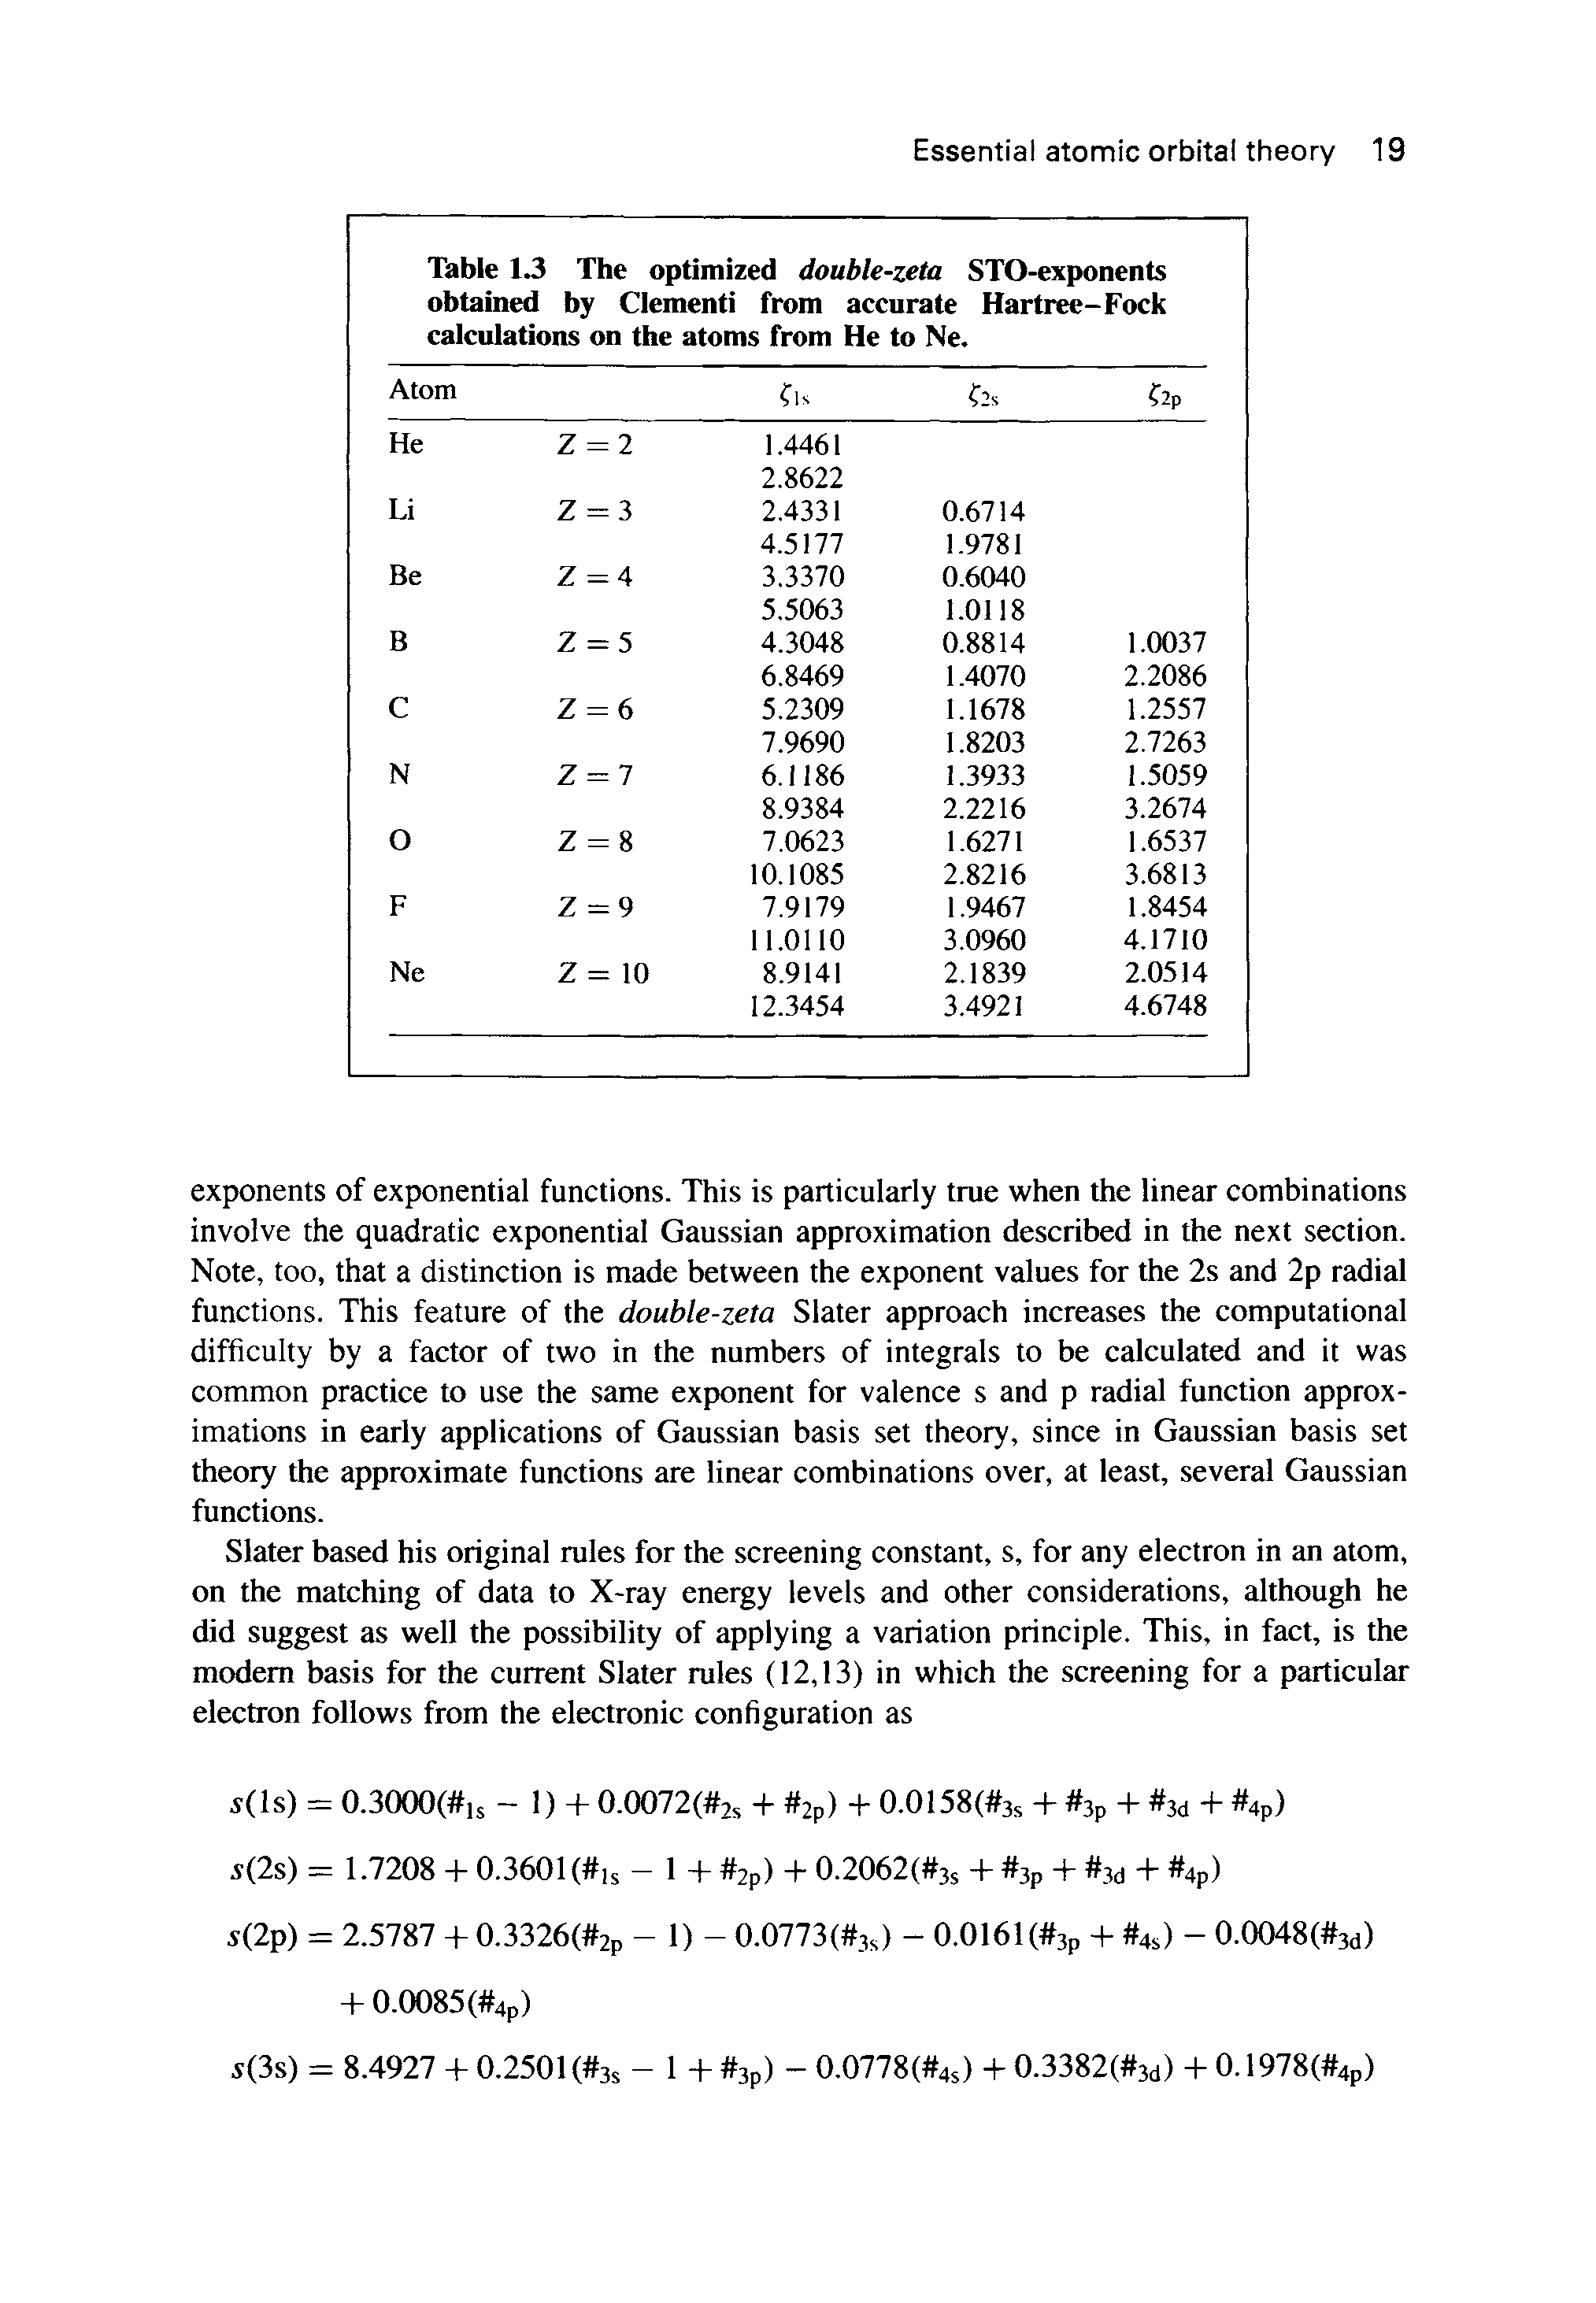 Table 13 The optimized double-zeta STO-exponents obtained by dementi from accurate Hartree-Fock calculations on the atoms from He to Ne.